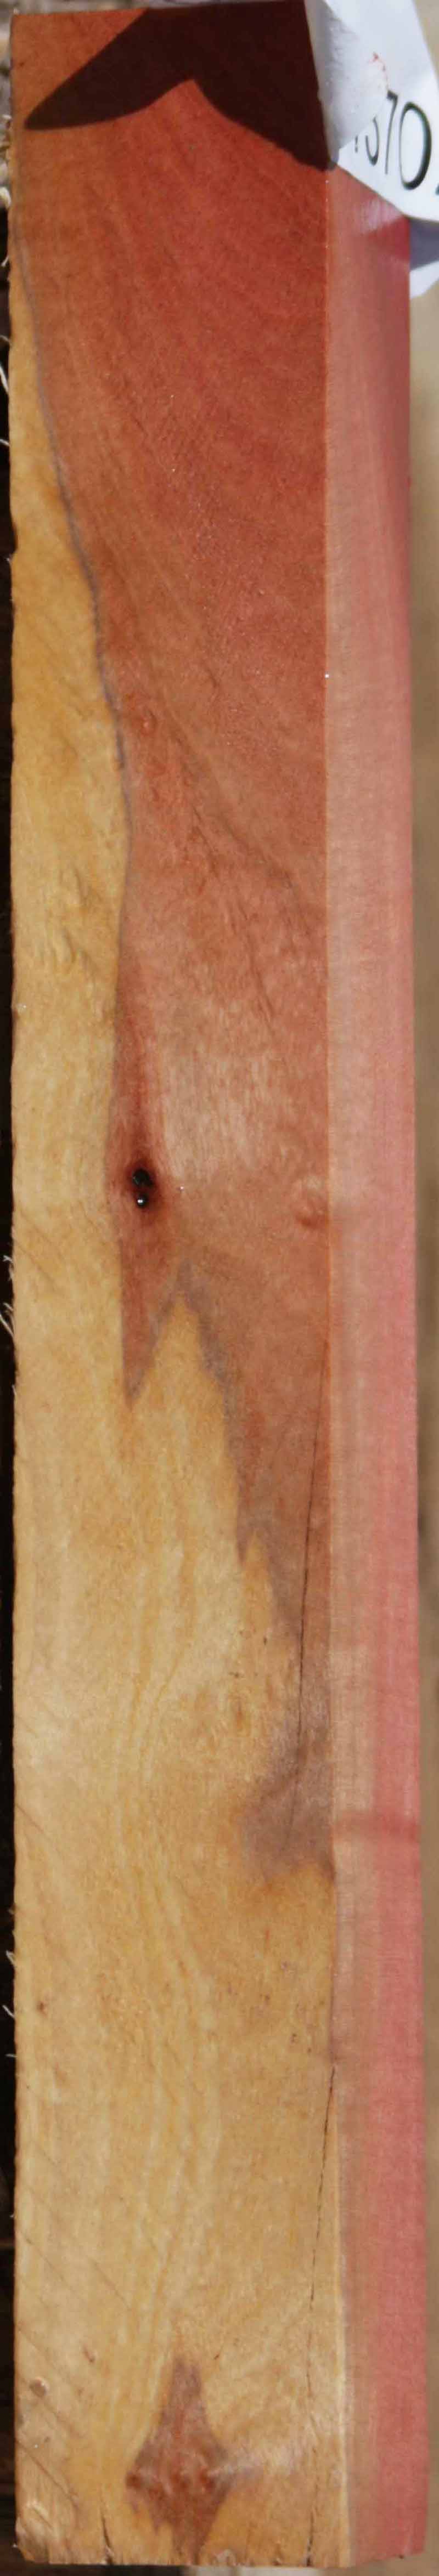 Curly Pink Ivory Lumber